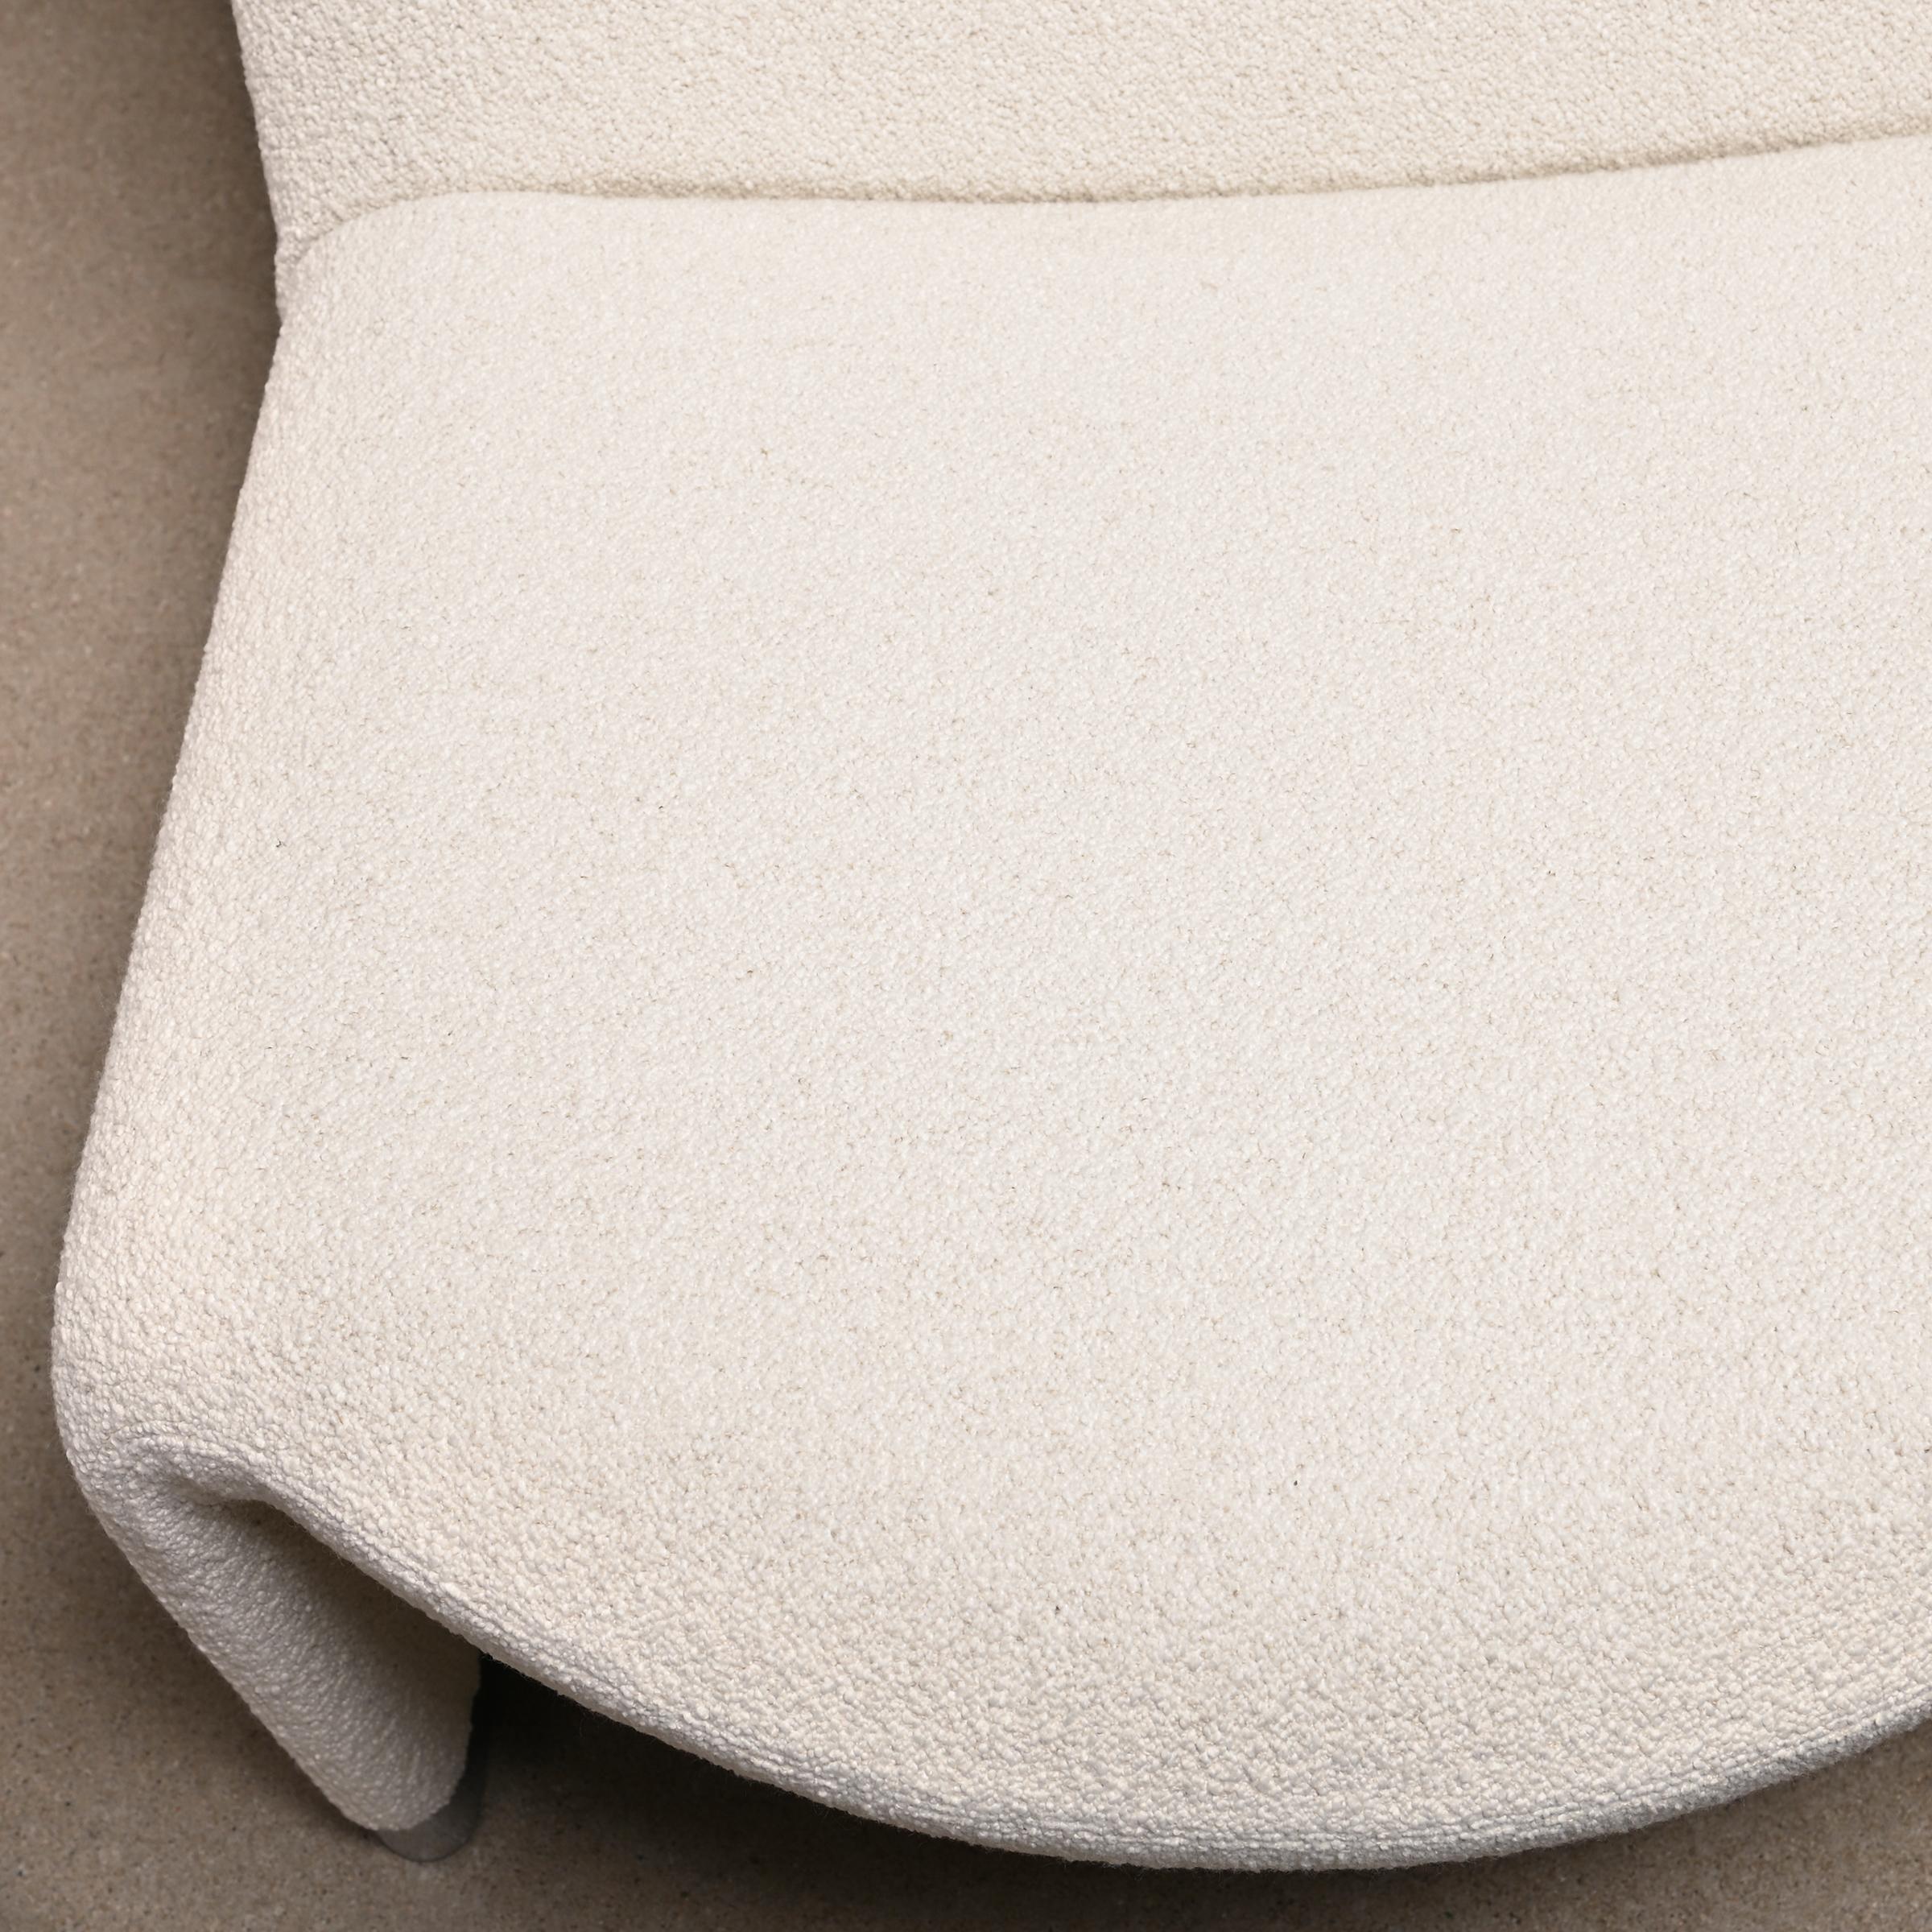 Metal Giancarlo Piretti Alky Lounge Chair in White Bouclé Fabric for Anonima Castelli For Sale